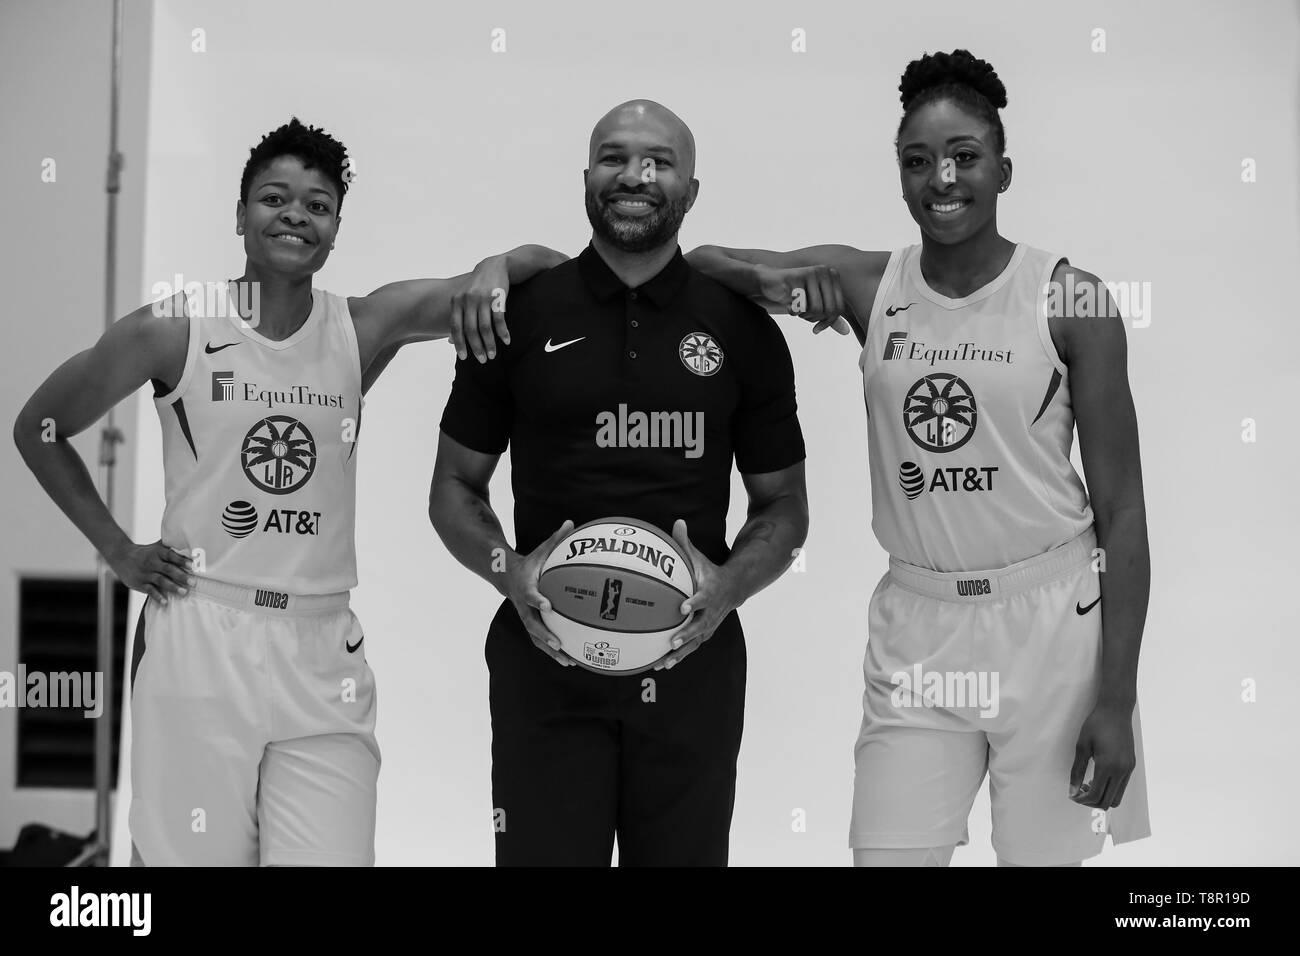 WNBA 2019: Los Angeles Sparks guard Alana Beard #0, Los Angeles Sparks forward Nneka Ogwumike #30 with coach Derek Fisher during Los Angeles Sparks Media Day May 14, 2019 at Los Angeles Southwest College. (Photo by Jevone Moore) Stock Photo